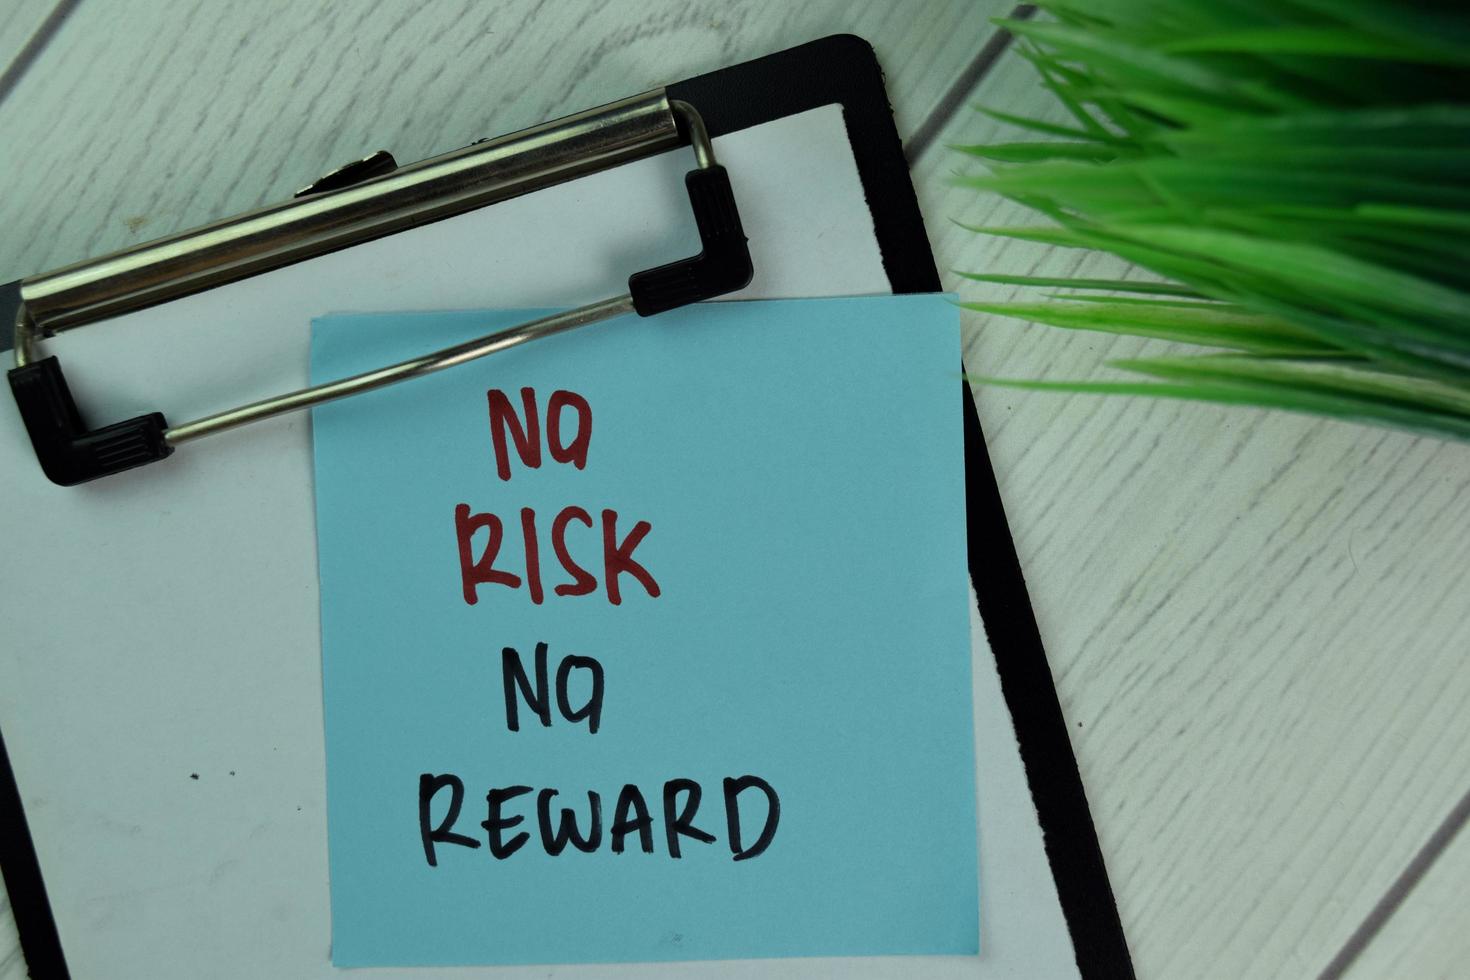 No Risk No Reward written on sticky note isolated on wooden table photo